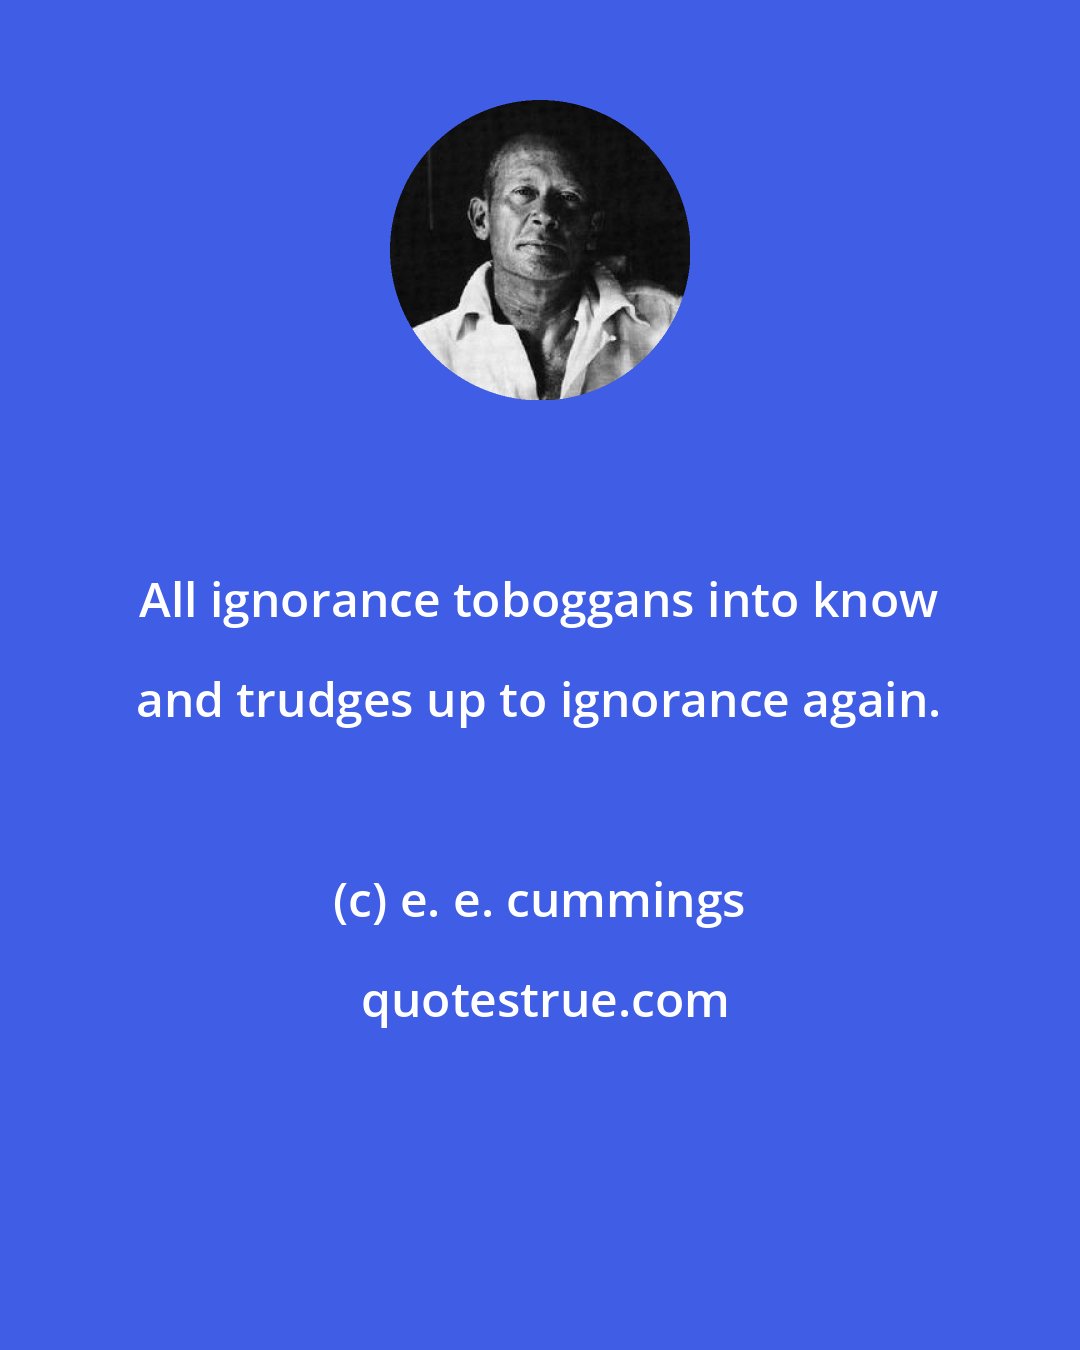 e. e. cummings: All ignorance toboggans into know and trudges up to ignorance again.